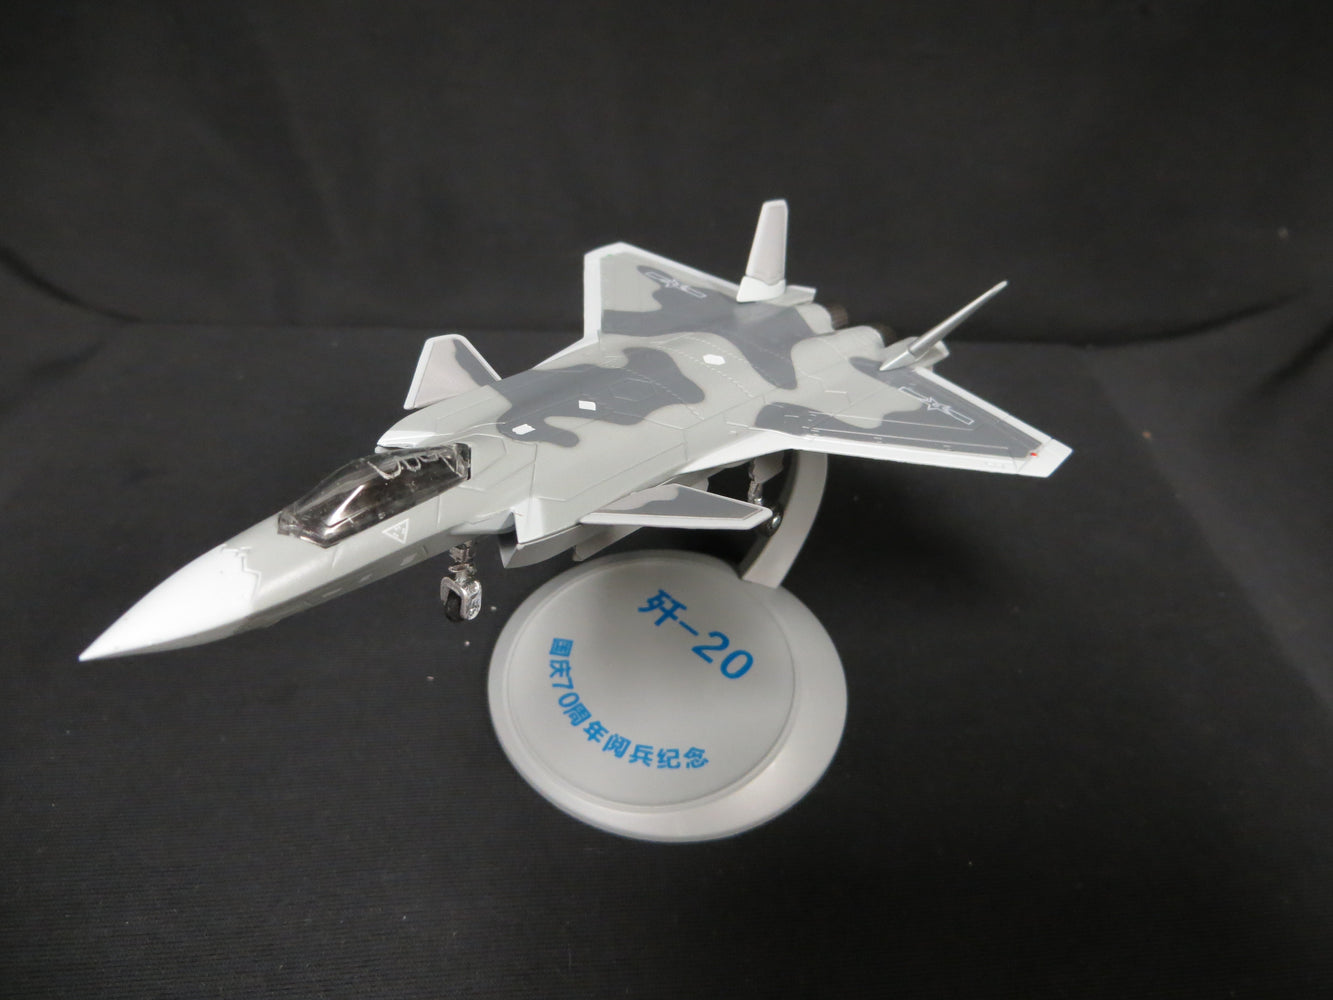 1/144 CCP China PLA Air Force J-20 Stealth Fighter Diecast Model